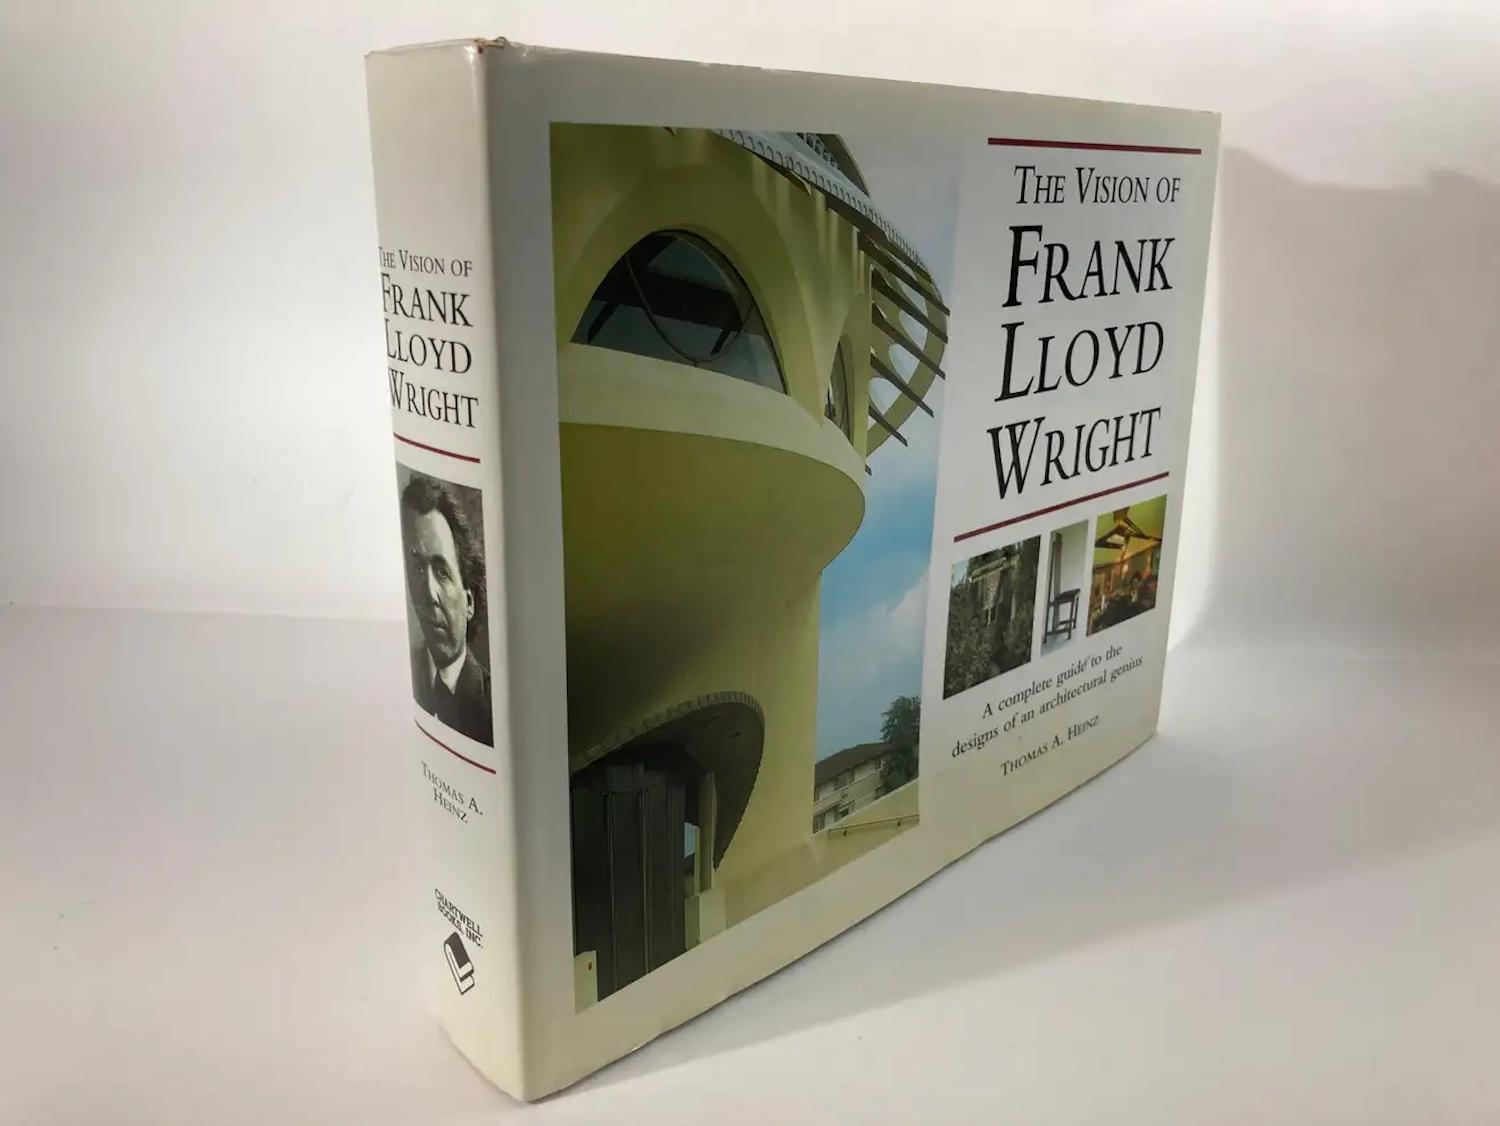 American Vision of Frank Lloyd Wright by Thomas a. Heinz Hardcover Book 1st Edition For Sale